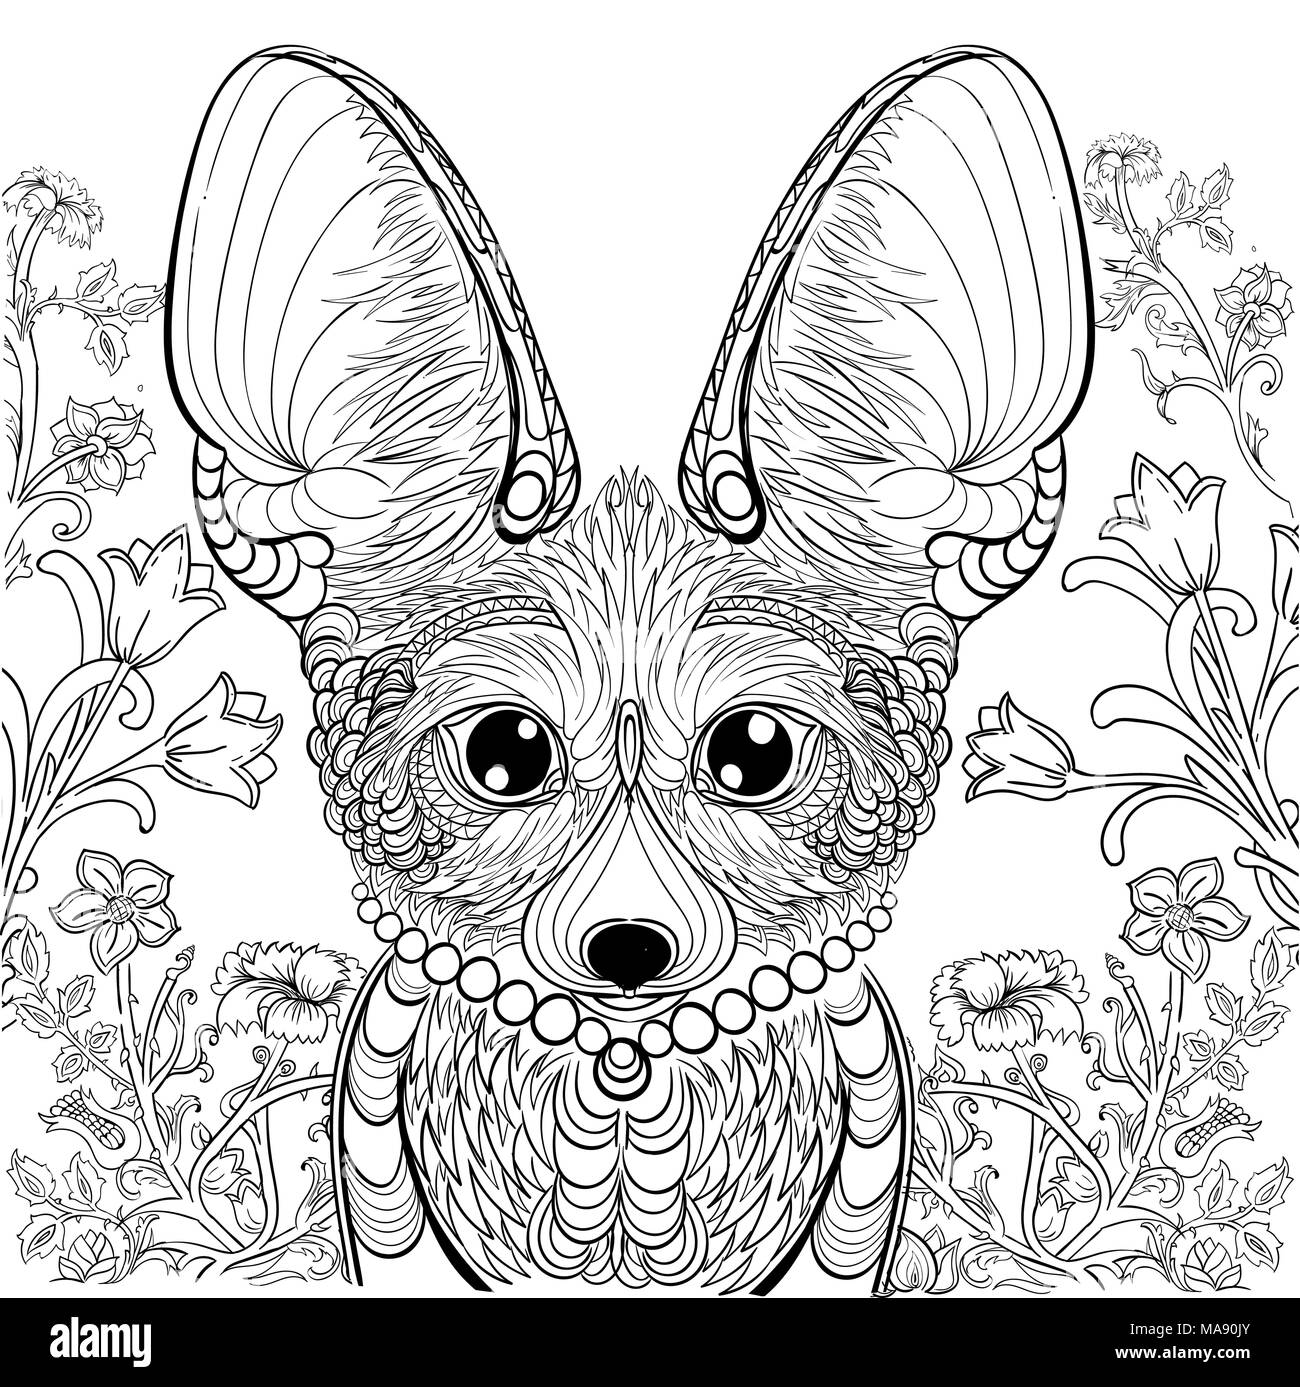 Fox fennec and floral elements for coloring book. Anti-stress coloring for adult. Tattoo stencil. Zentangle style. Black and white lines. Lace pattern Stock Vector